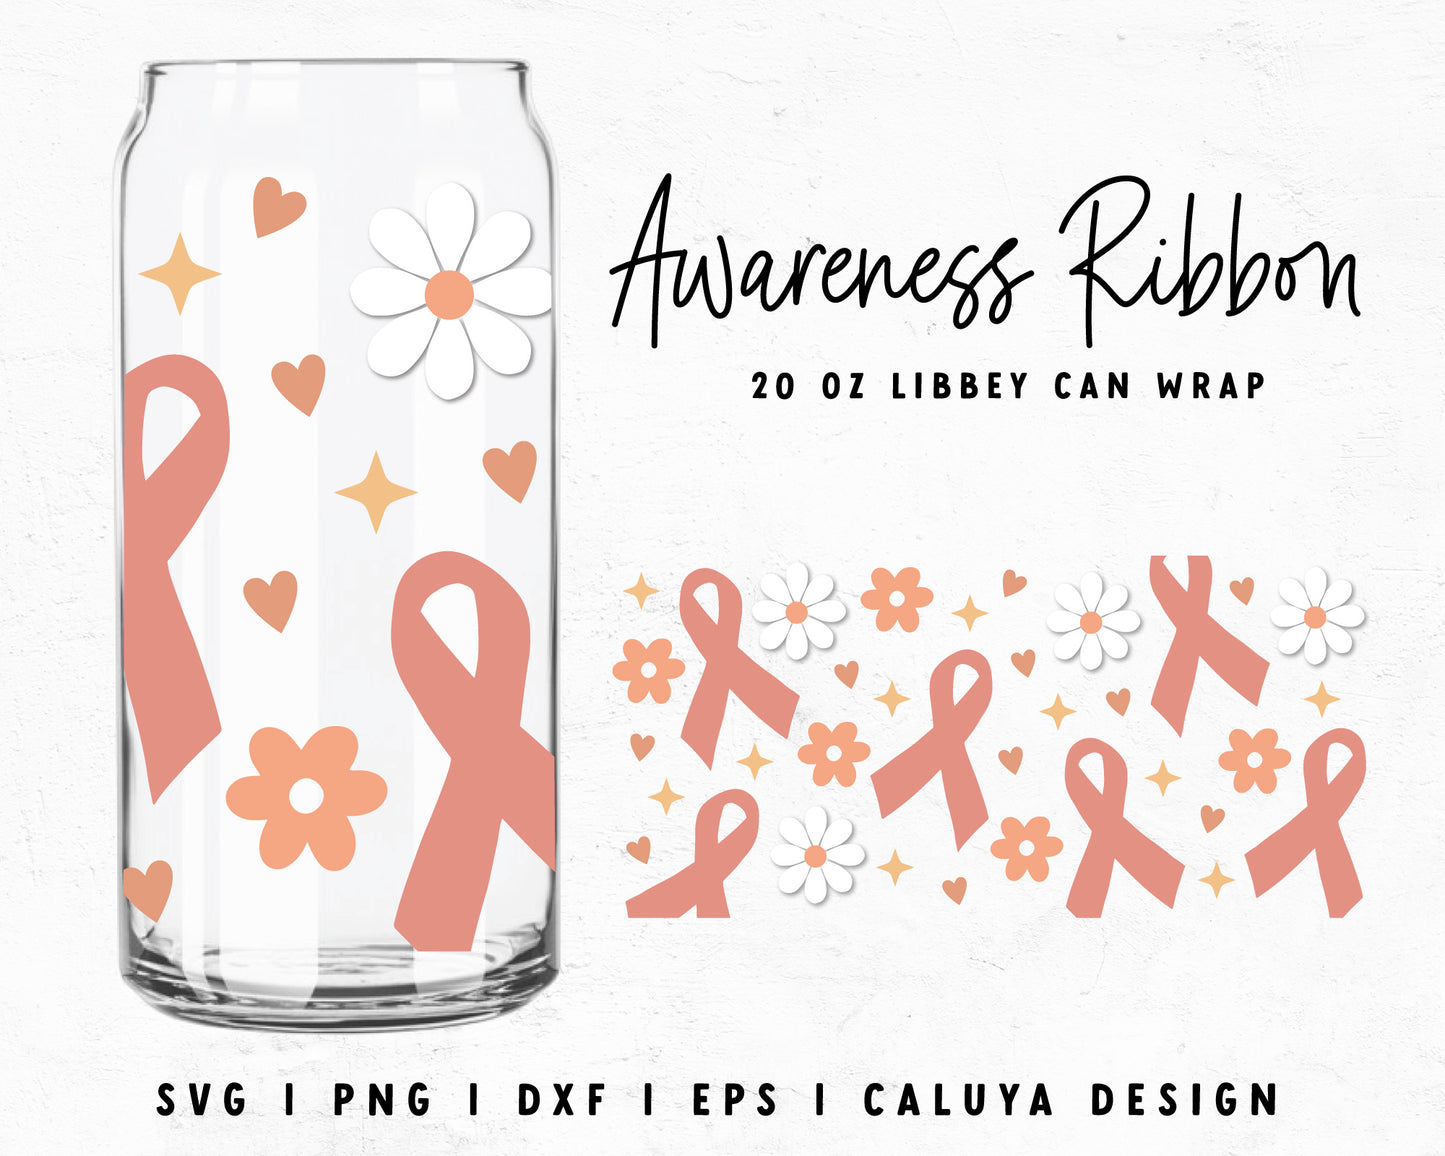 20oz Libbey Can Ribbons With Flowers Wrap Cut File for Cricut, Cameo Silhouette | Free SVG Cut File